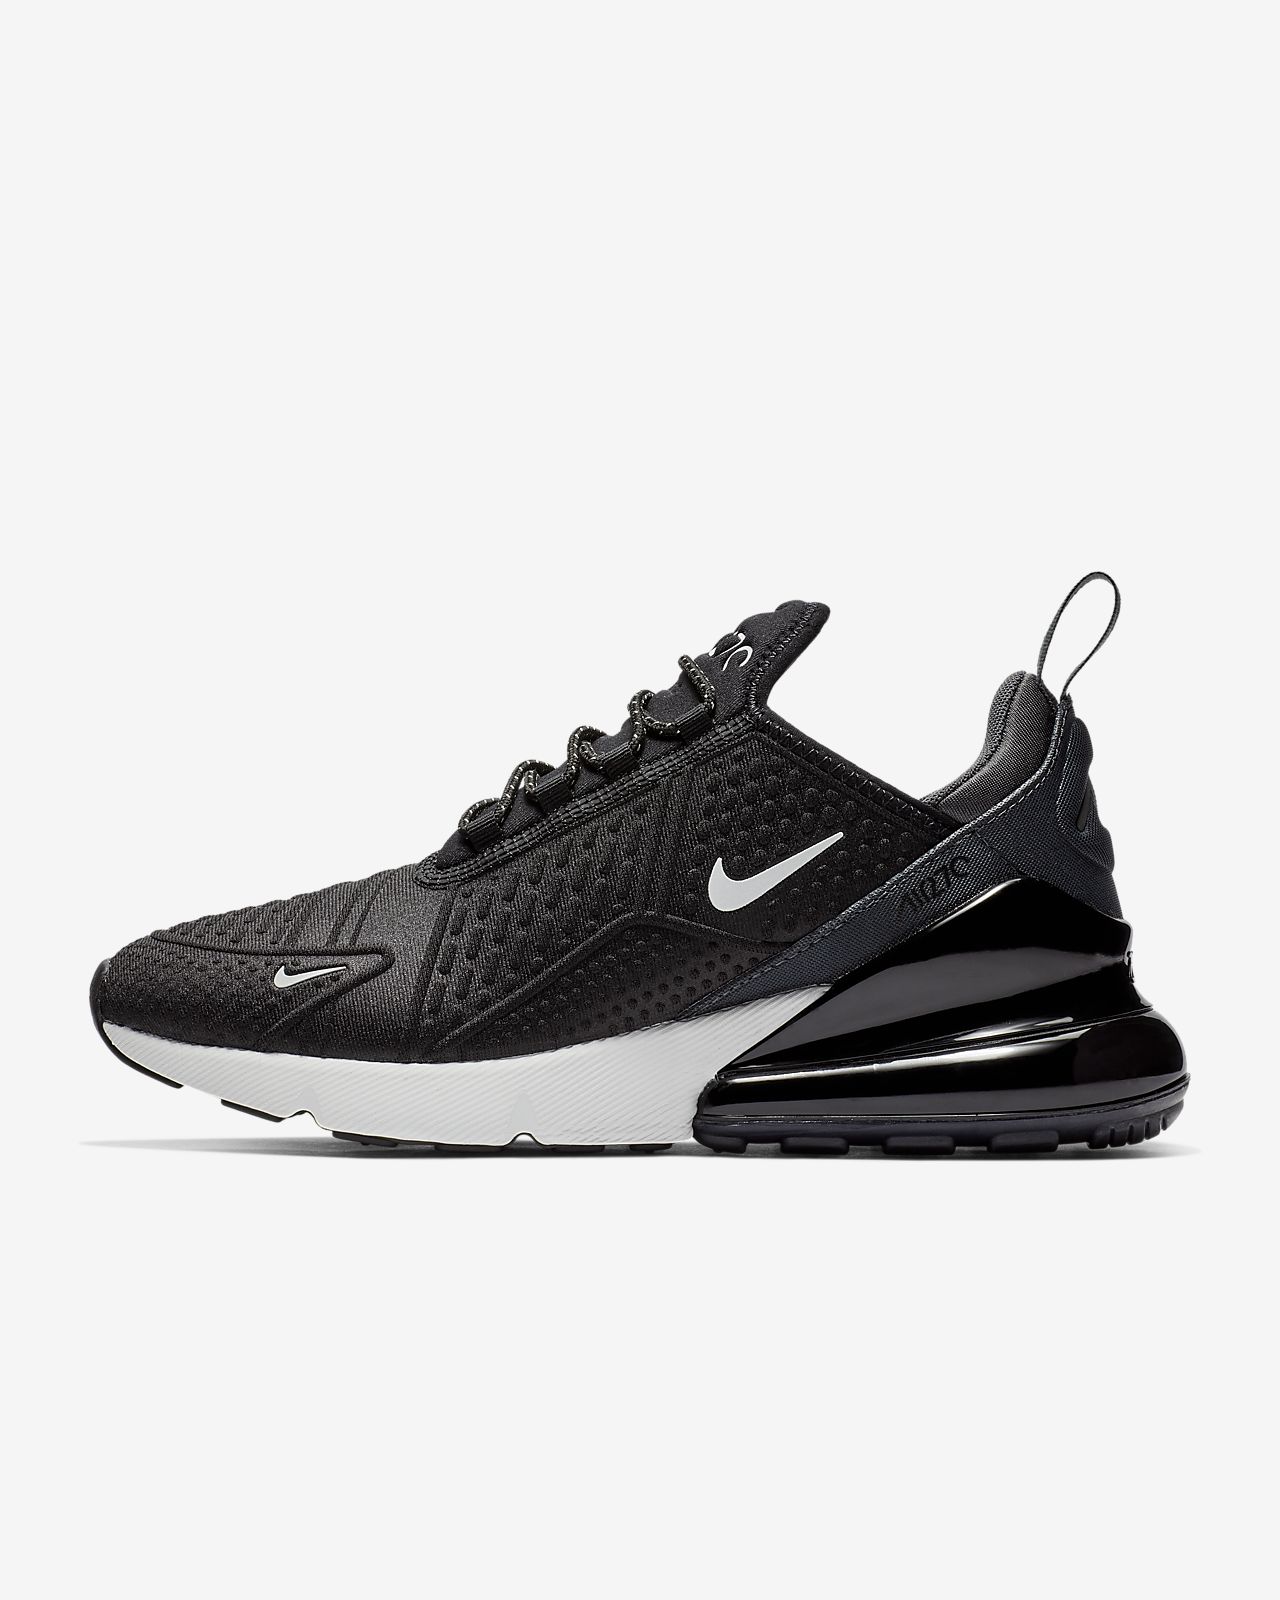 nike air max 270 black and white size 5.5